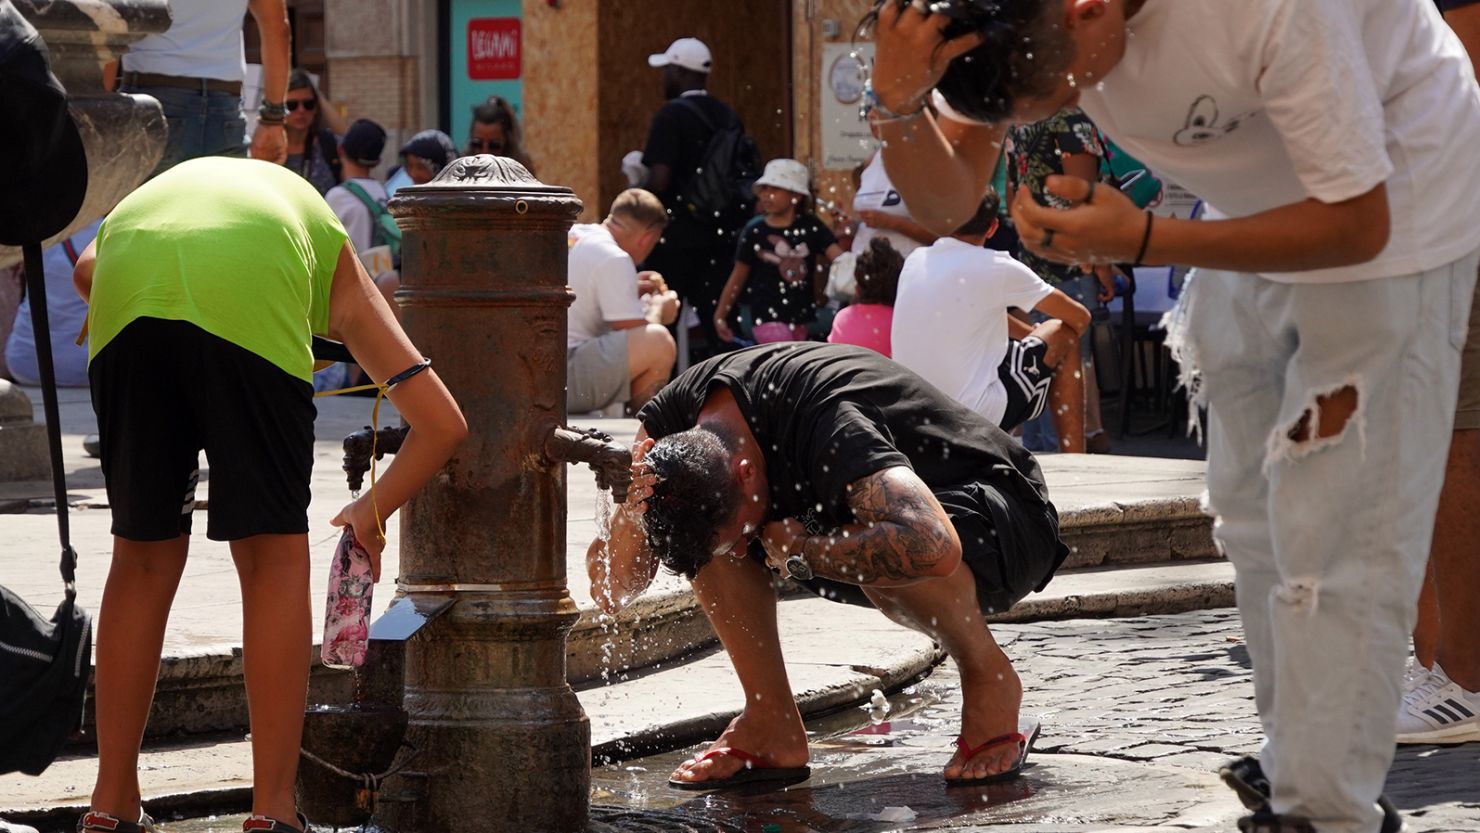 People cool off near the Pantheon in Rome, Italy, on Aug. 22, 2023. Italy experienced severe heat waves this summer.